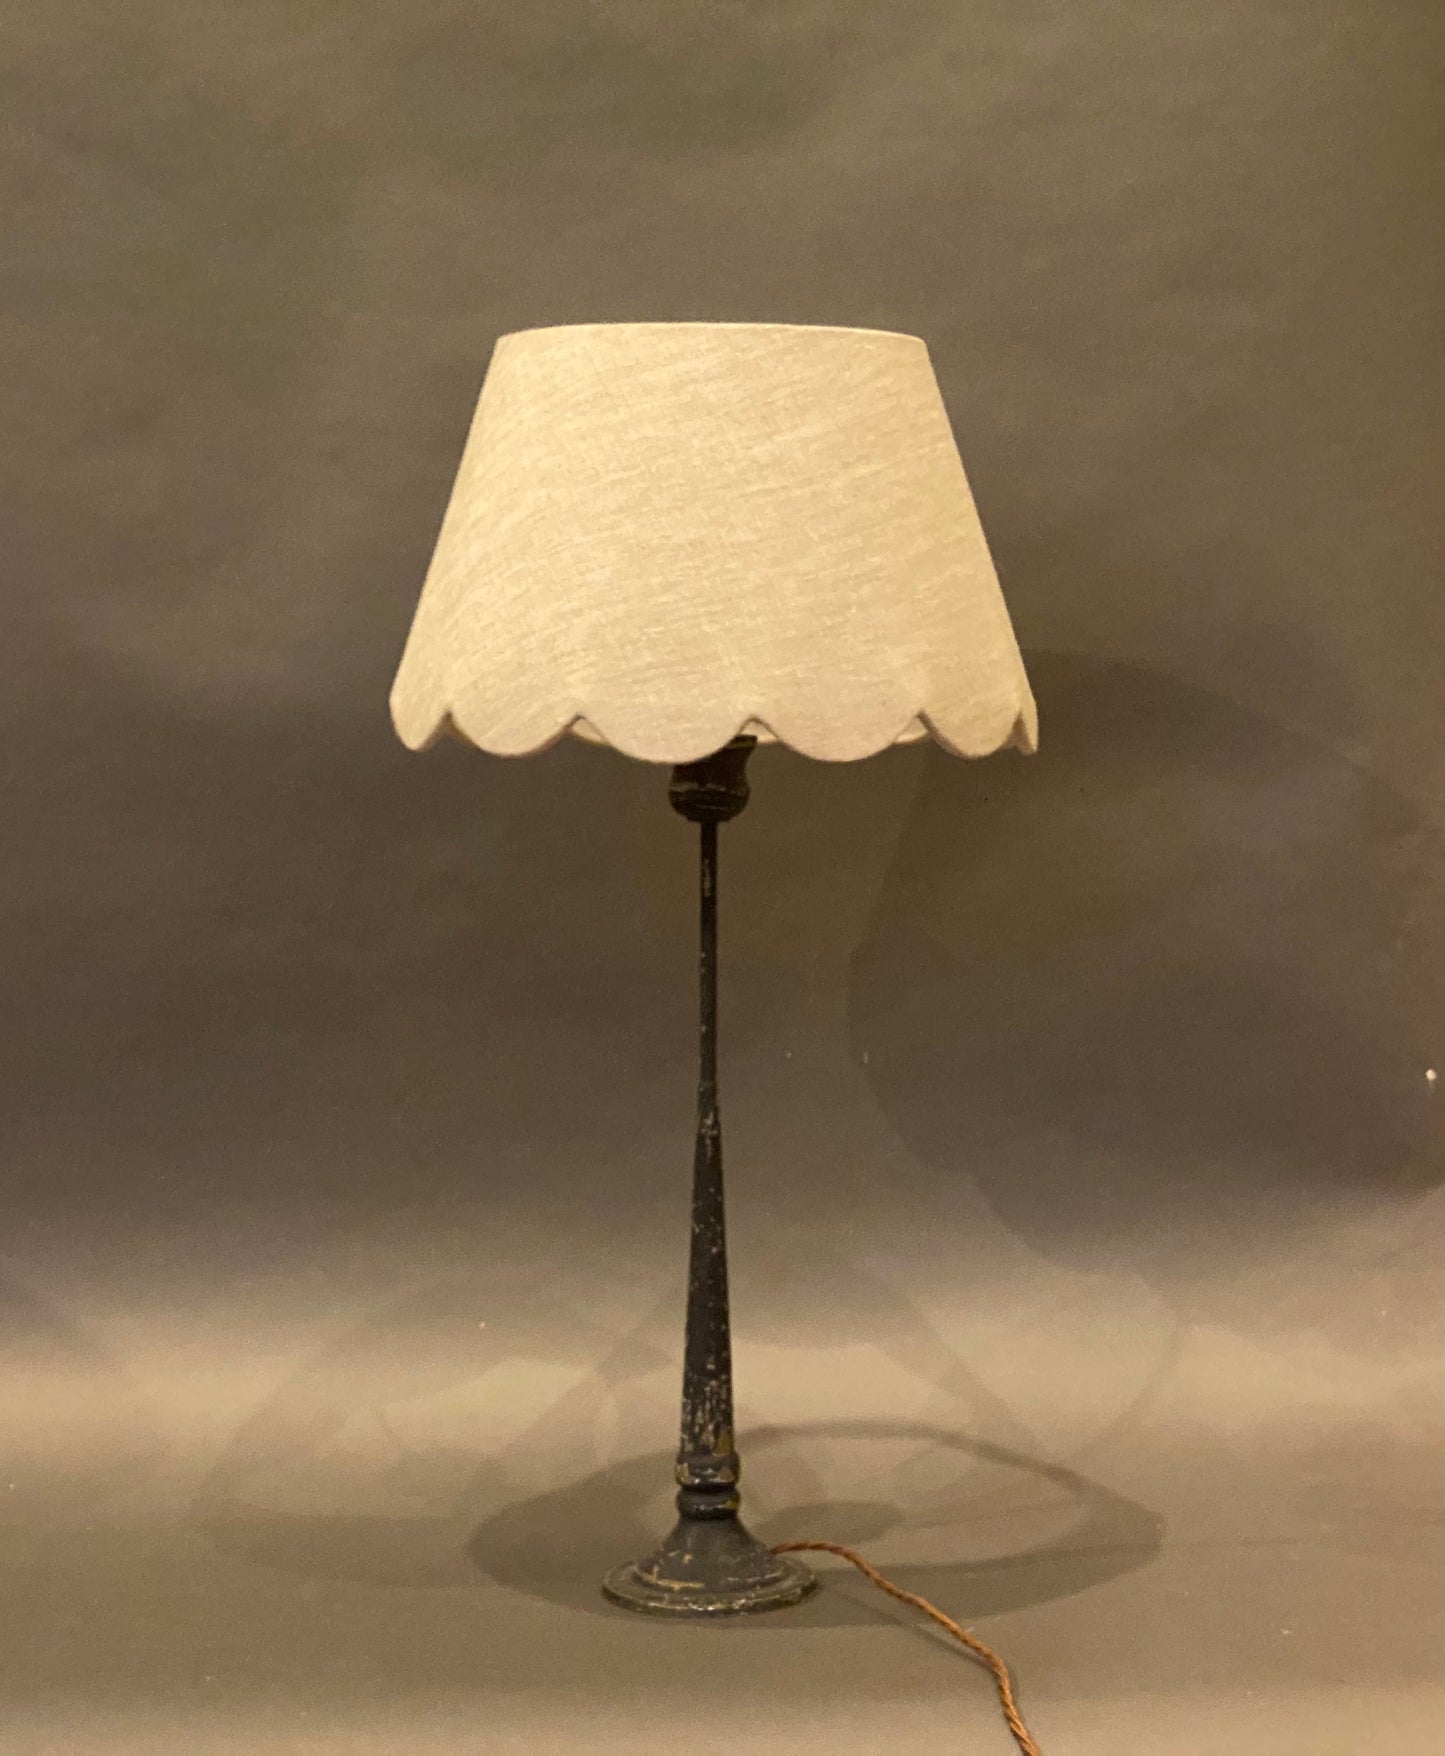 Plain Linen Scallop Lampshade shown on a candlestick lampbase